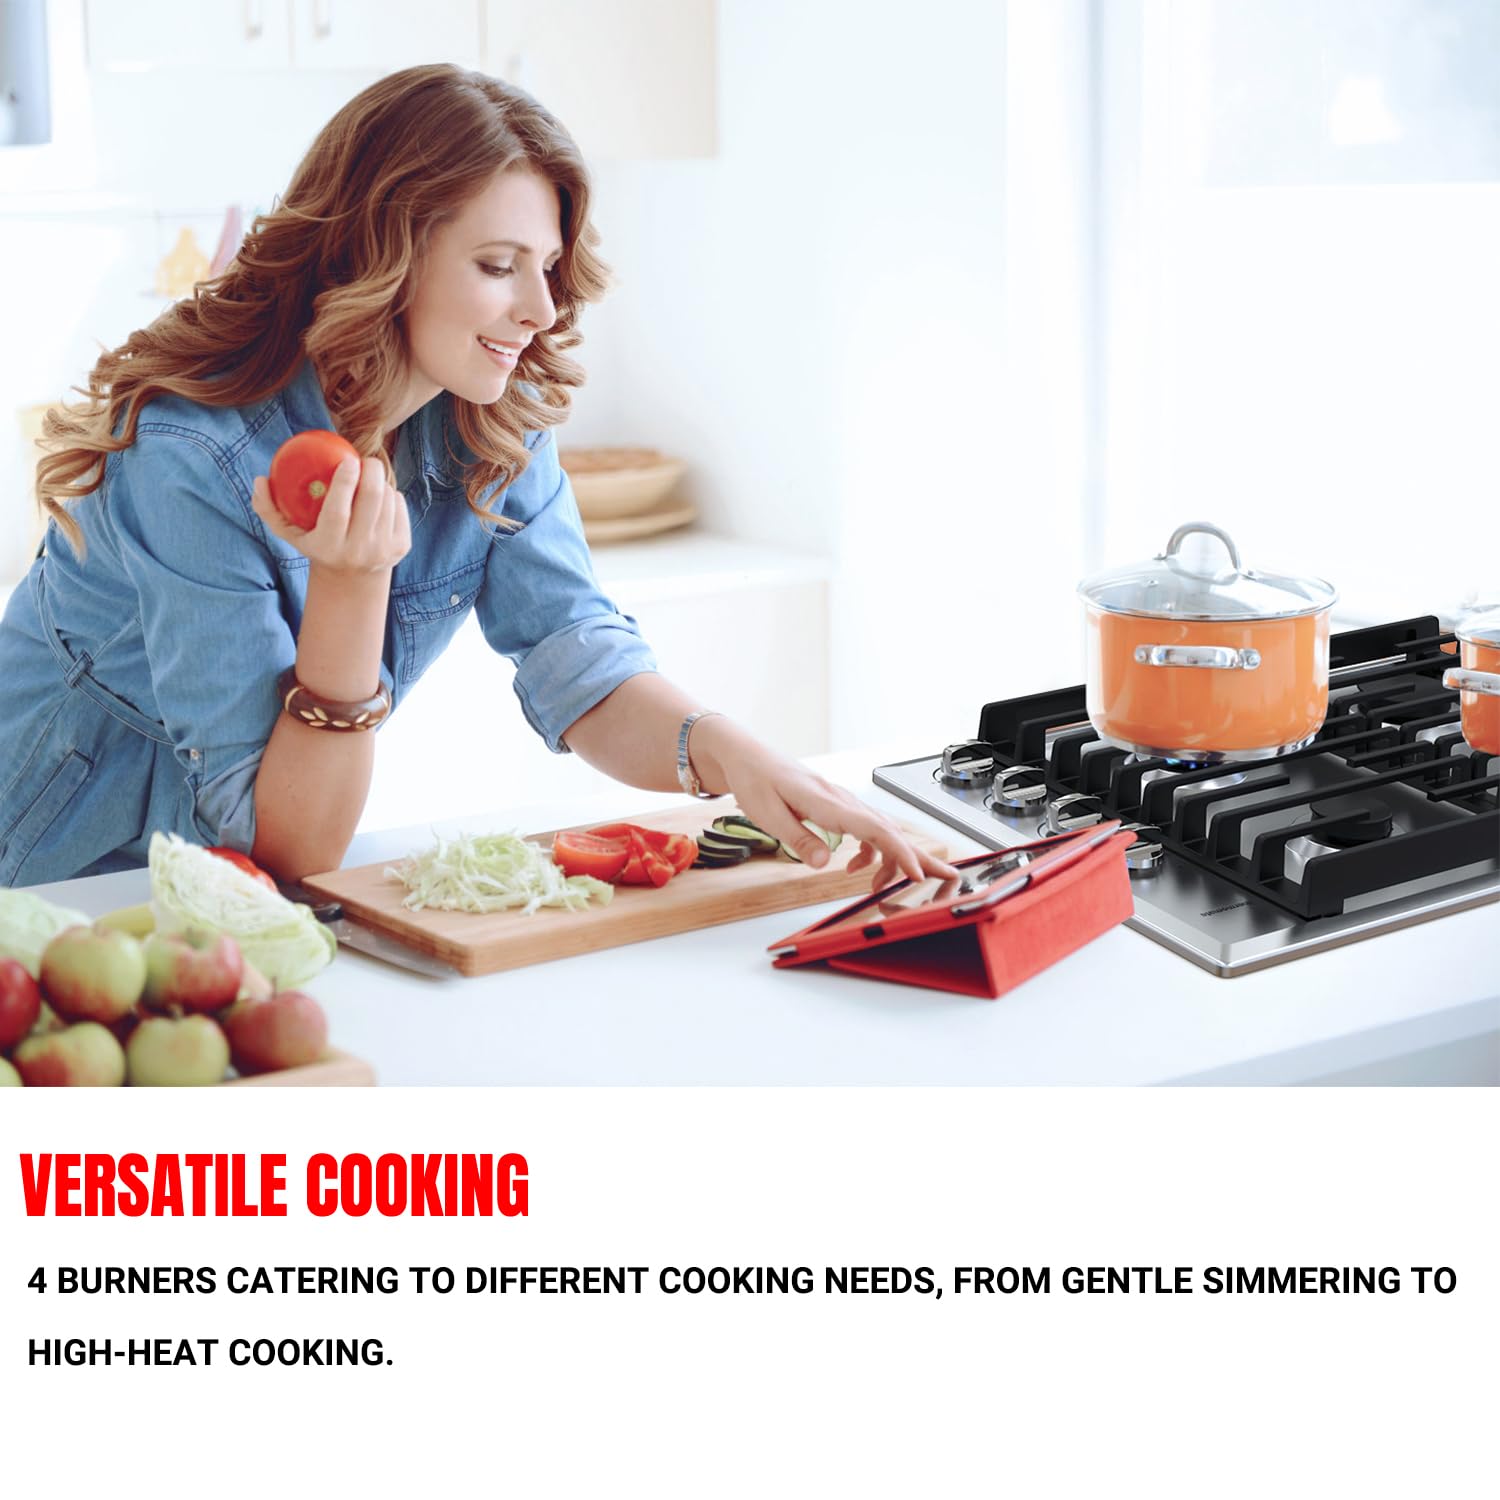 4 BURNERS CATERING TO DIFFERENT COOKING NEEDS, FROM GENTLE SIMMERING TOHIGH-HEAT COOKING.